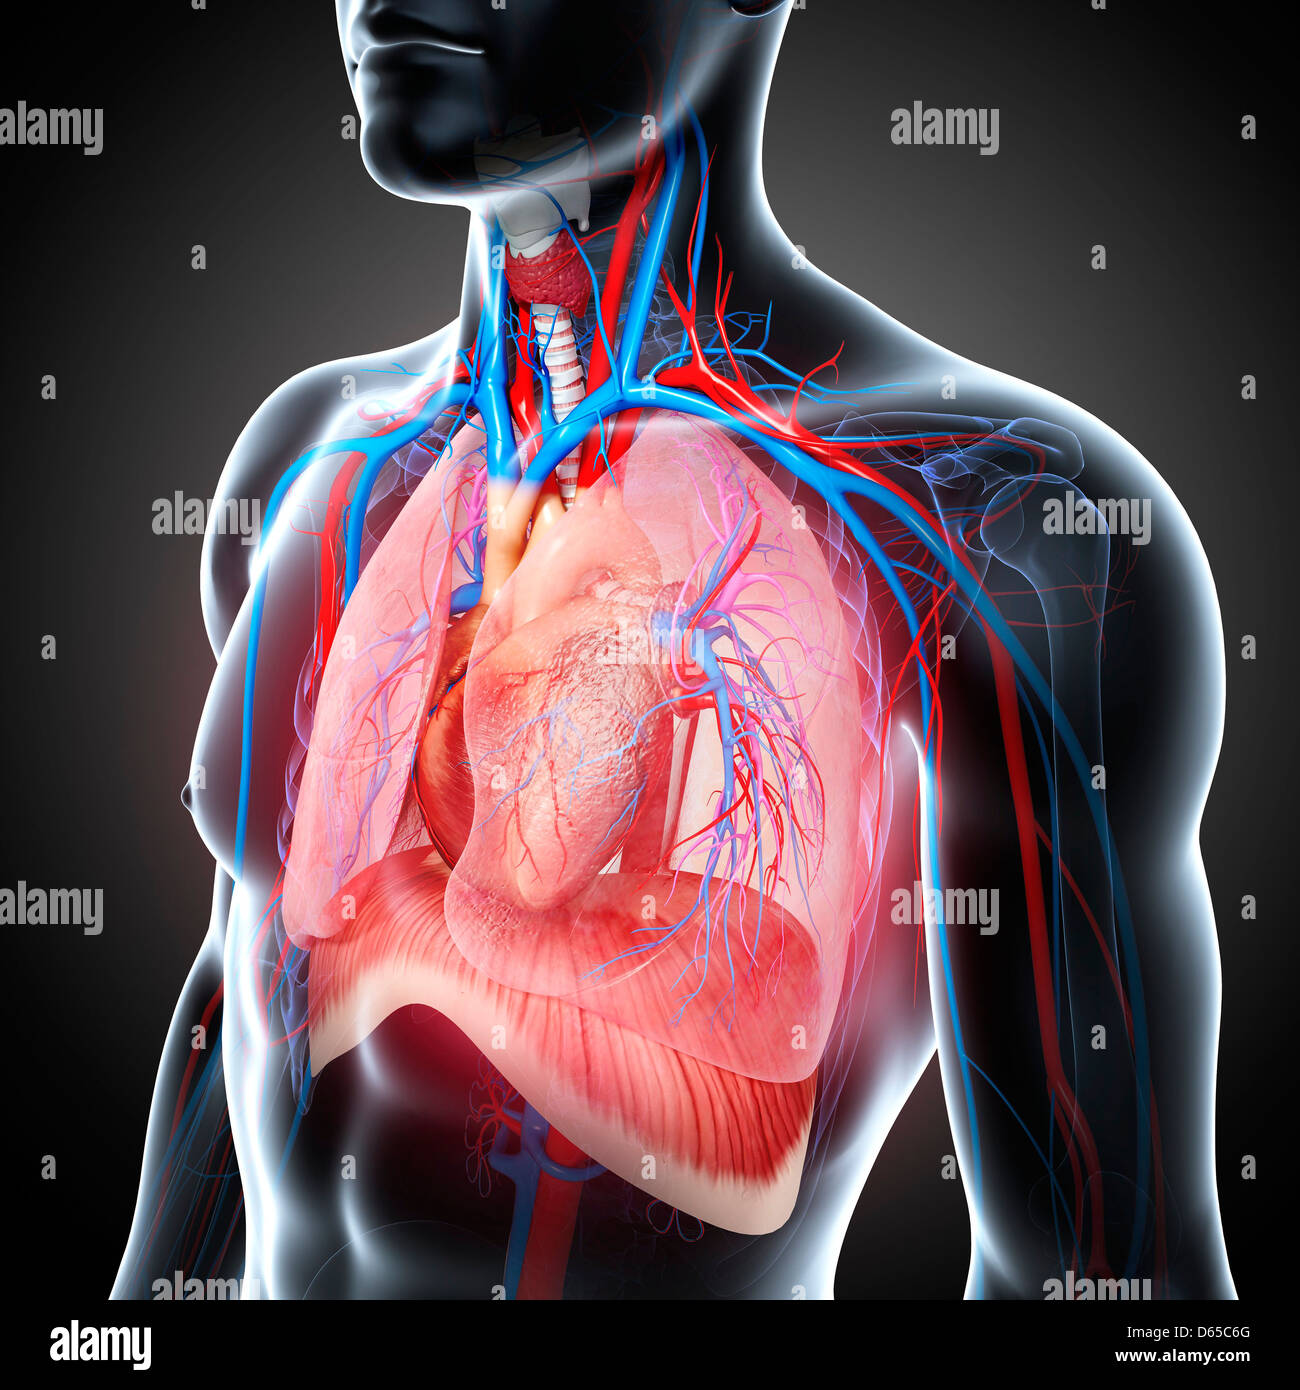 Male Chest Anatomy High Resolution Stock Photography And Images Alamy